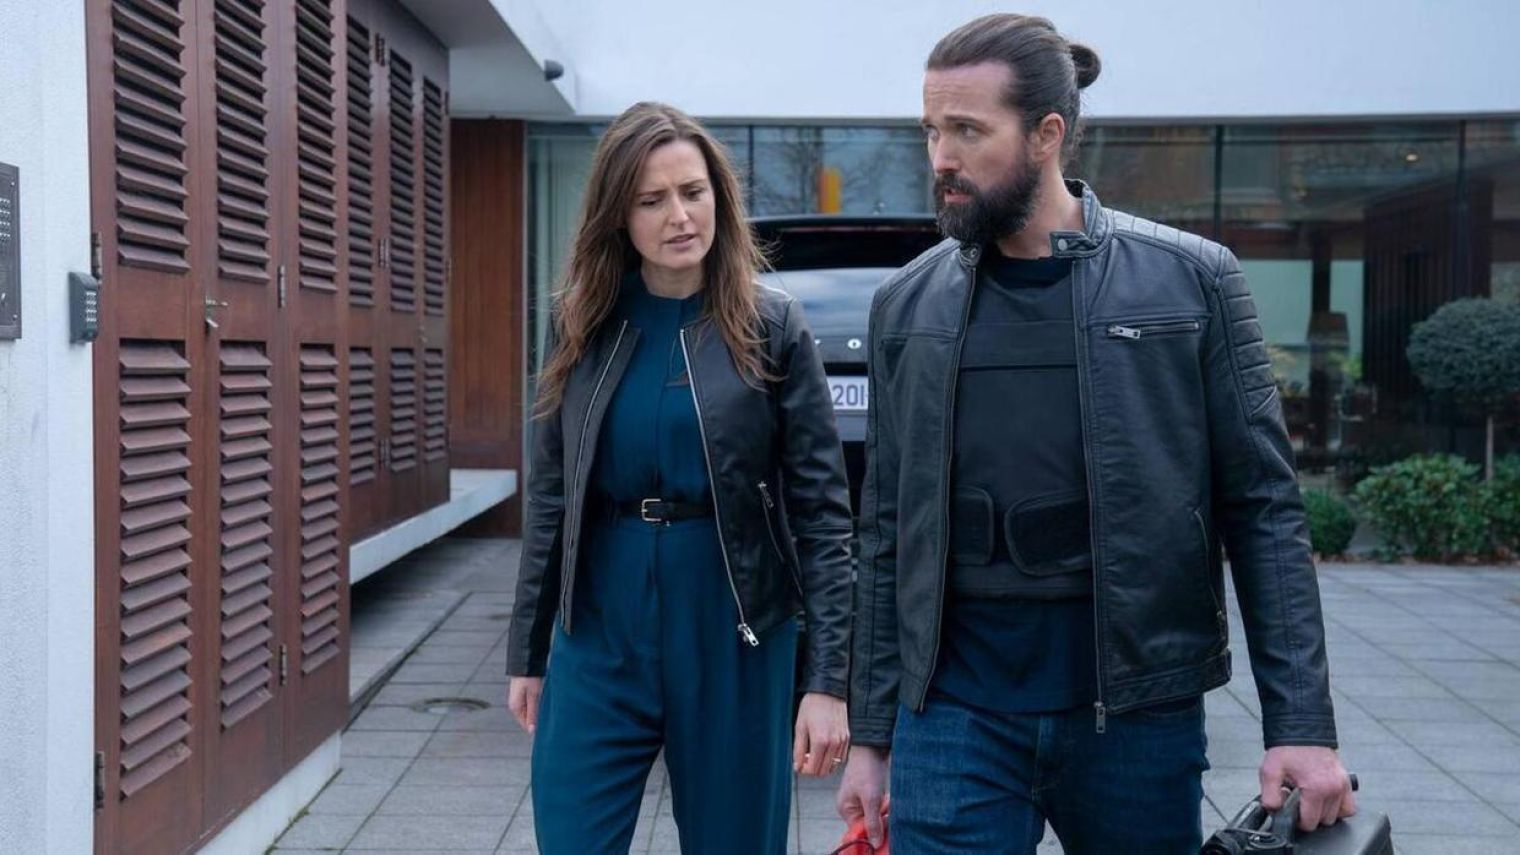 The second series of Kin, starring Emmett J. Scanlan, premieres in the UK on BBC One tonight